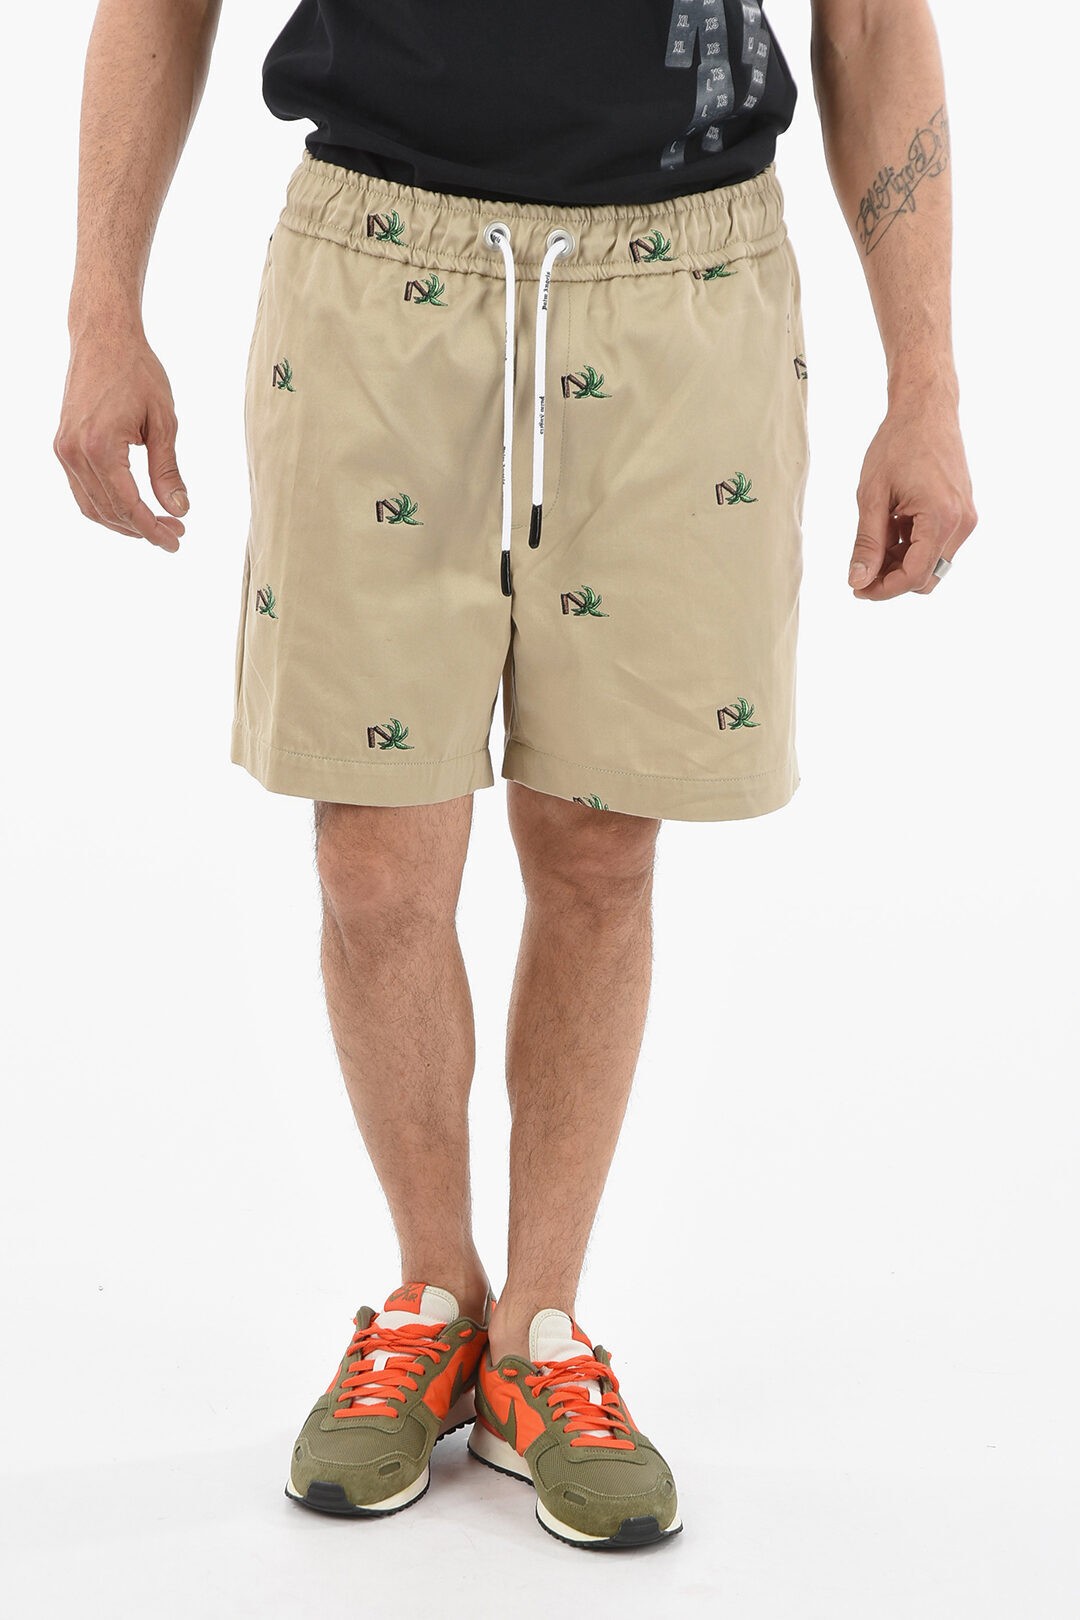 PALM ANGELS パーム エンジェルス Beige パンツ PMCB034S22FAB001 6155 メンズ ALL OVER EMBROIDERED BROKEN PALM COTTON SHORTS  dk